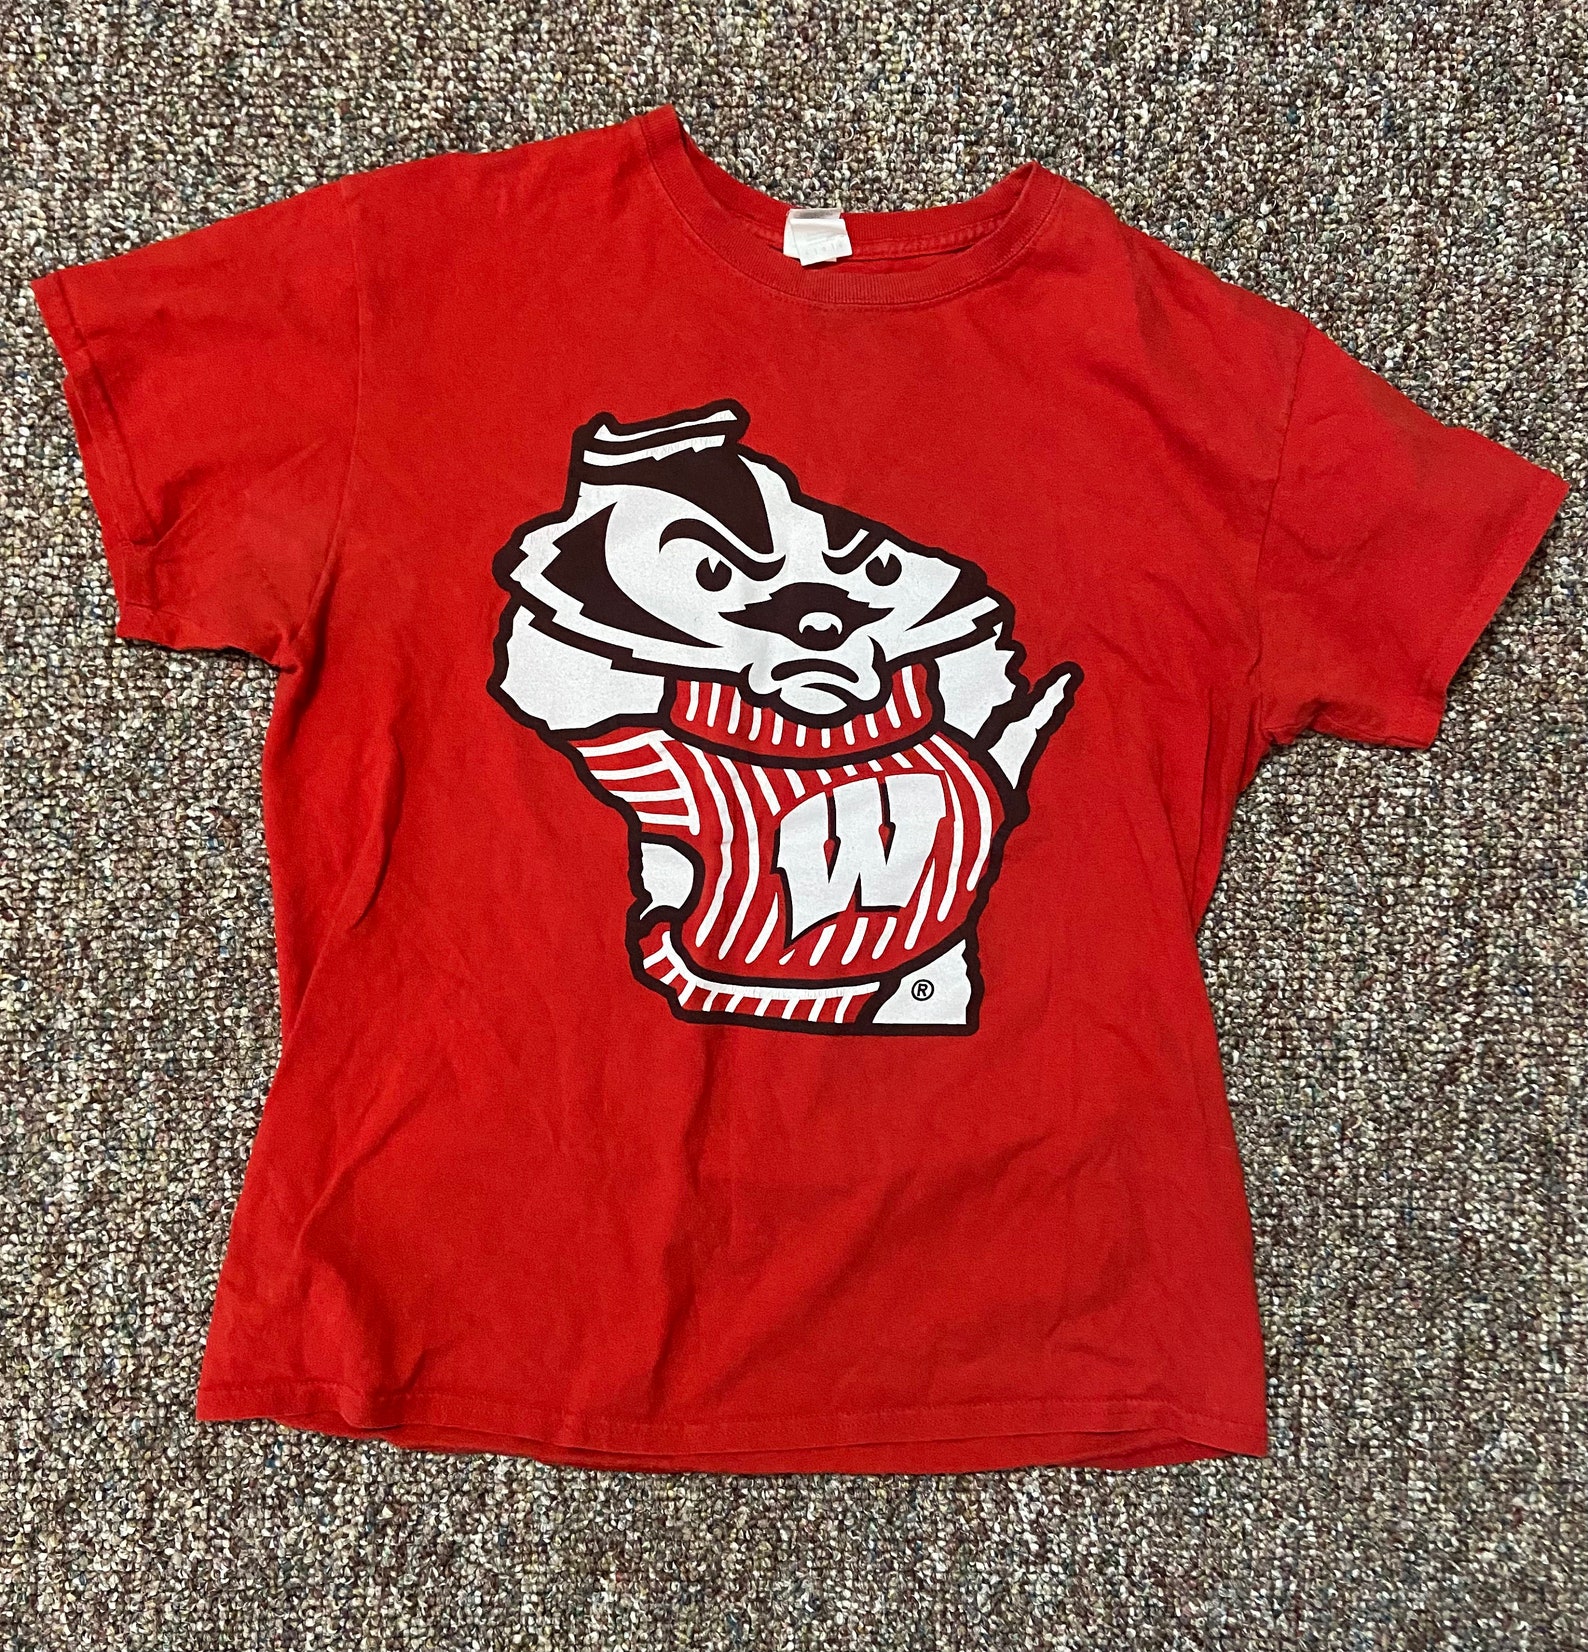 Mens Size L Red Wisconsin Badgers T-shirt | Etsy